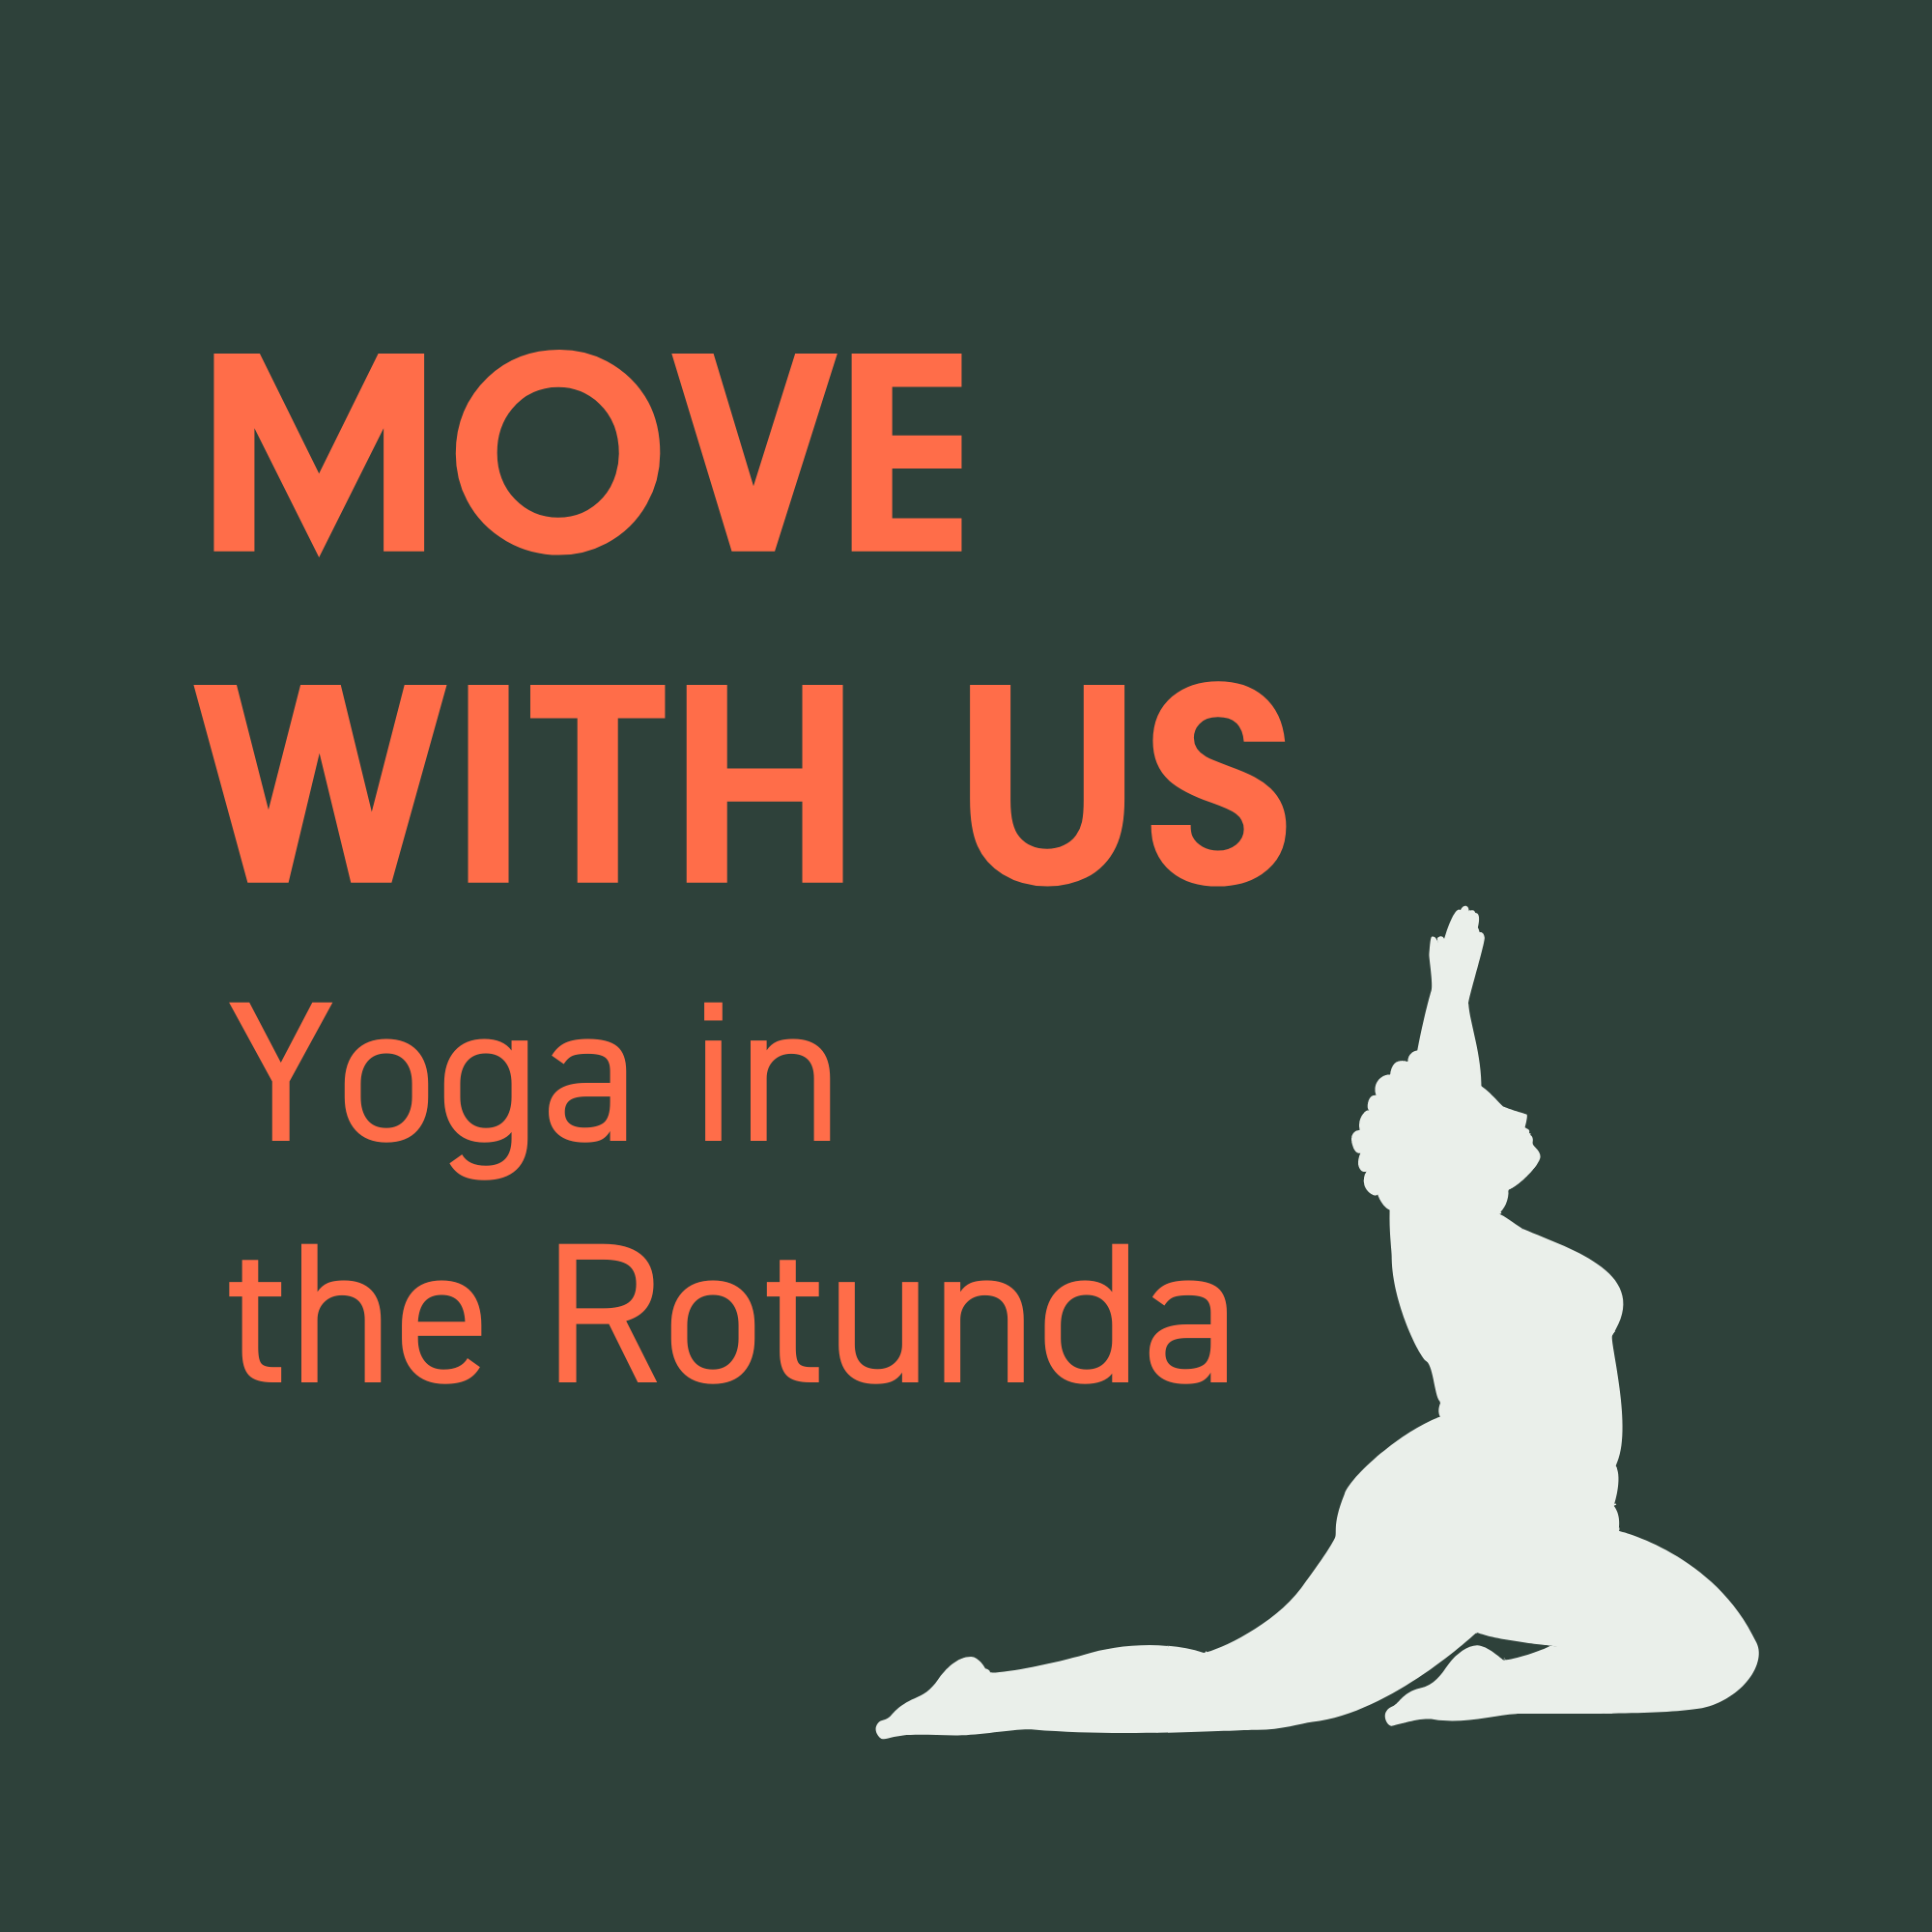 Dark green graphic with a white icon of a person doing a yoga pose and orange text that says Move With Us, Yoga in the Rotunda